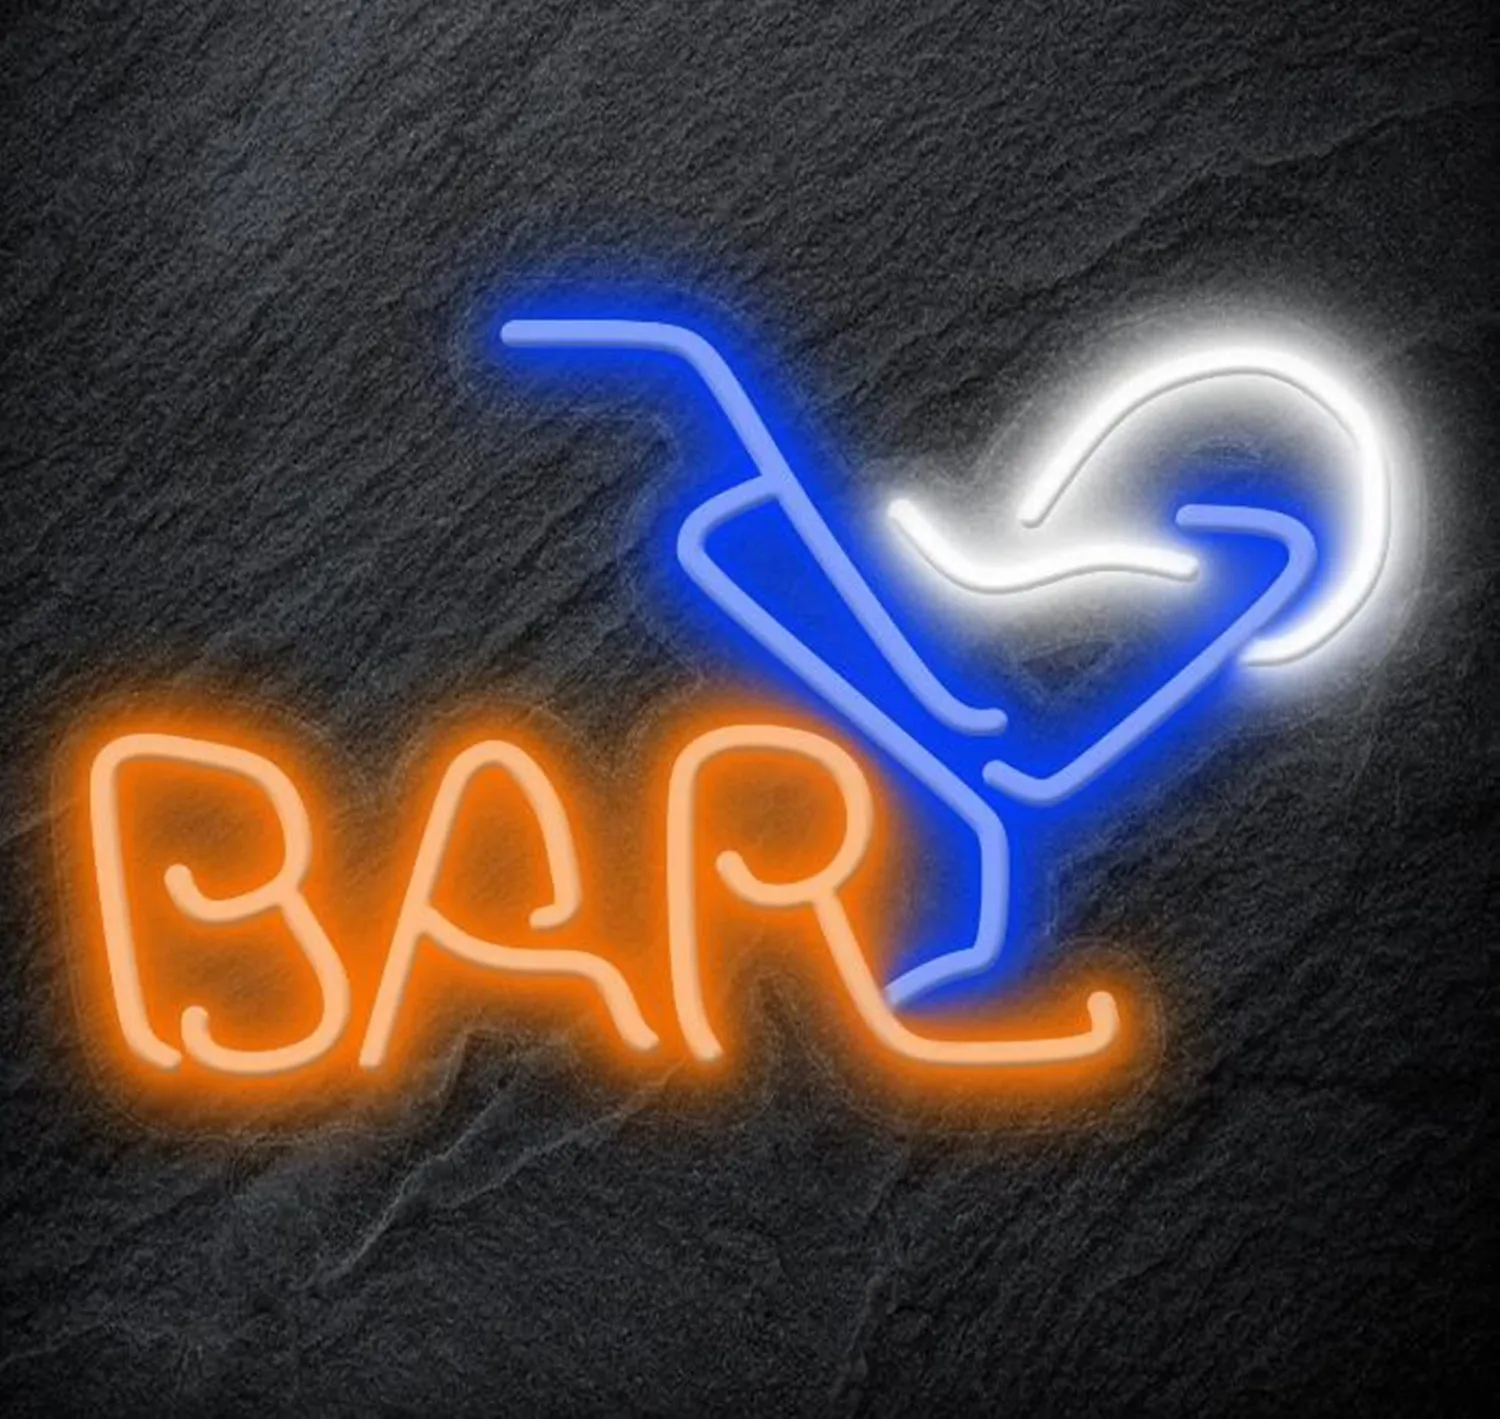 BAR Neon Sign New LED Luminous Letter Neon Light Abstract BAR Party Bar Bedroom Party Decoration Design Atmosphere Light Party 12w uv purple light bulb e27 glow in the dark party supplies party lamp light bar fluorescent atmosphere decoration bulb